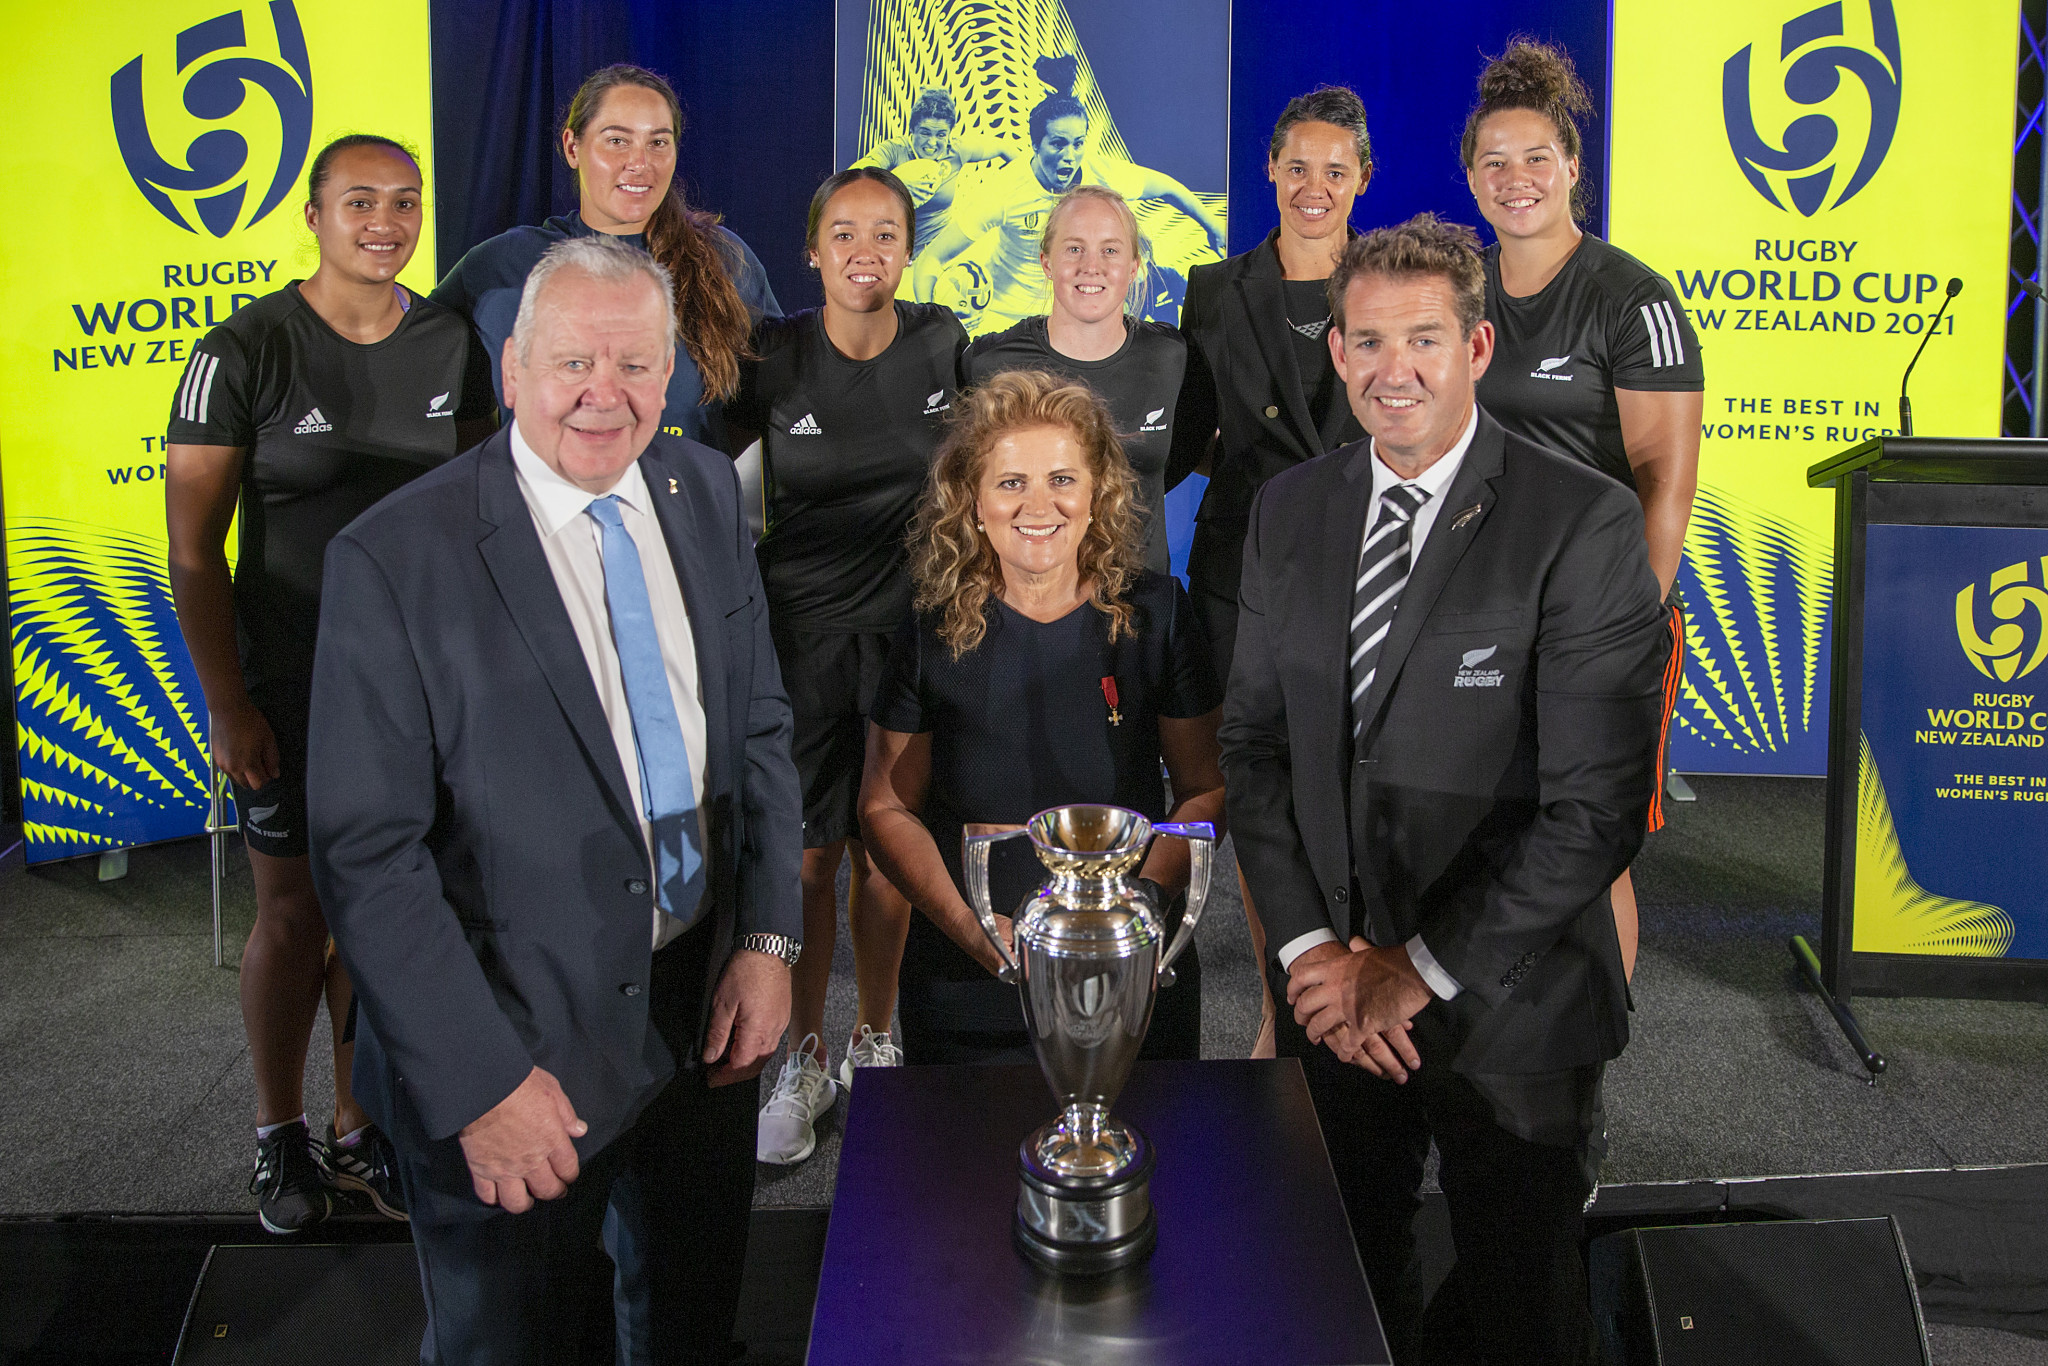 World Rugby announced the dates and branding for the women's 2021 Rugby World Cup in New Zealand ©Twitter